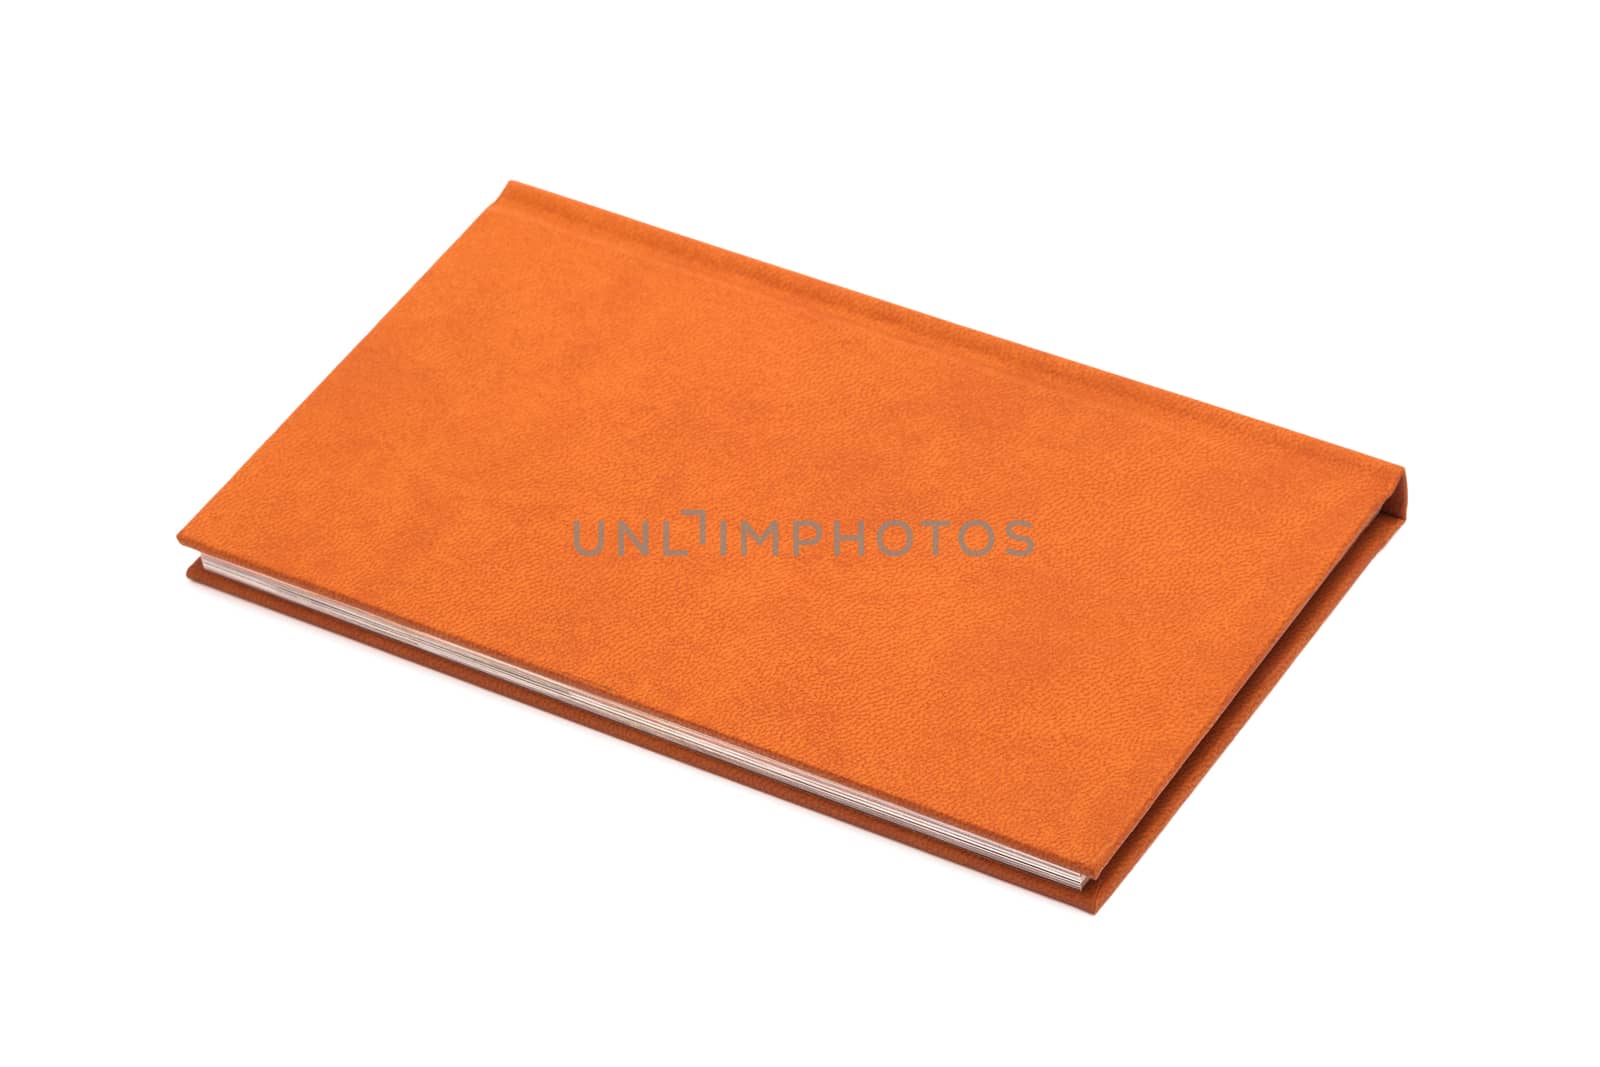 book in a brown cover on a white background